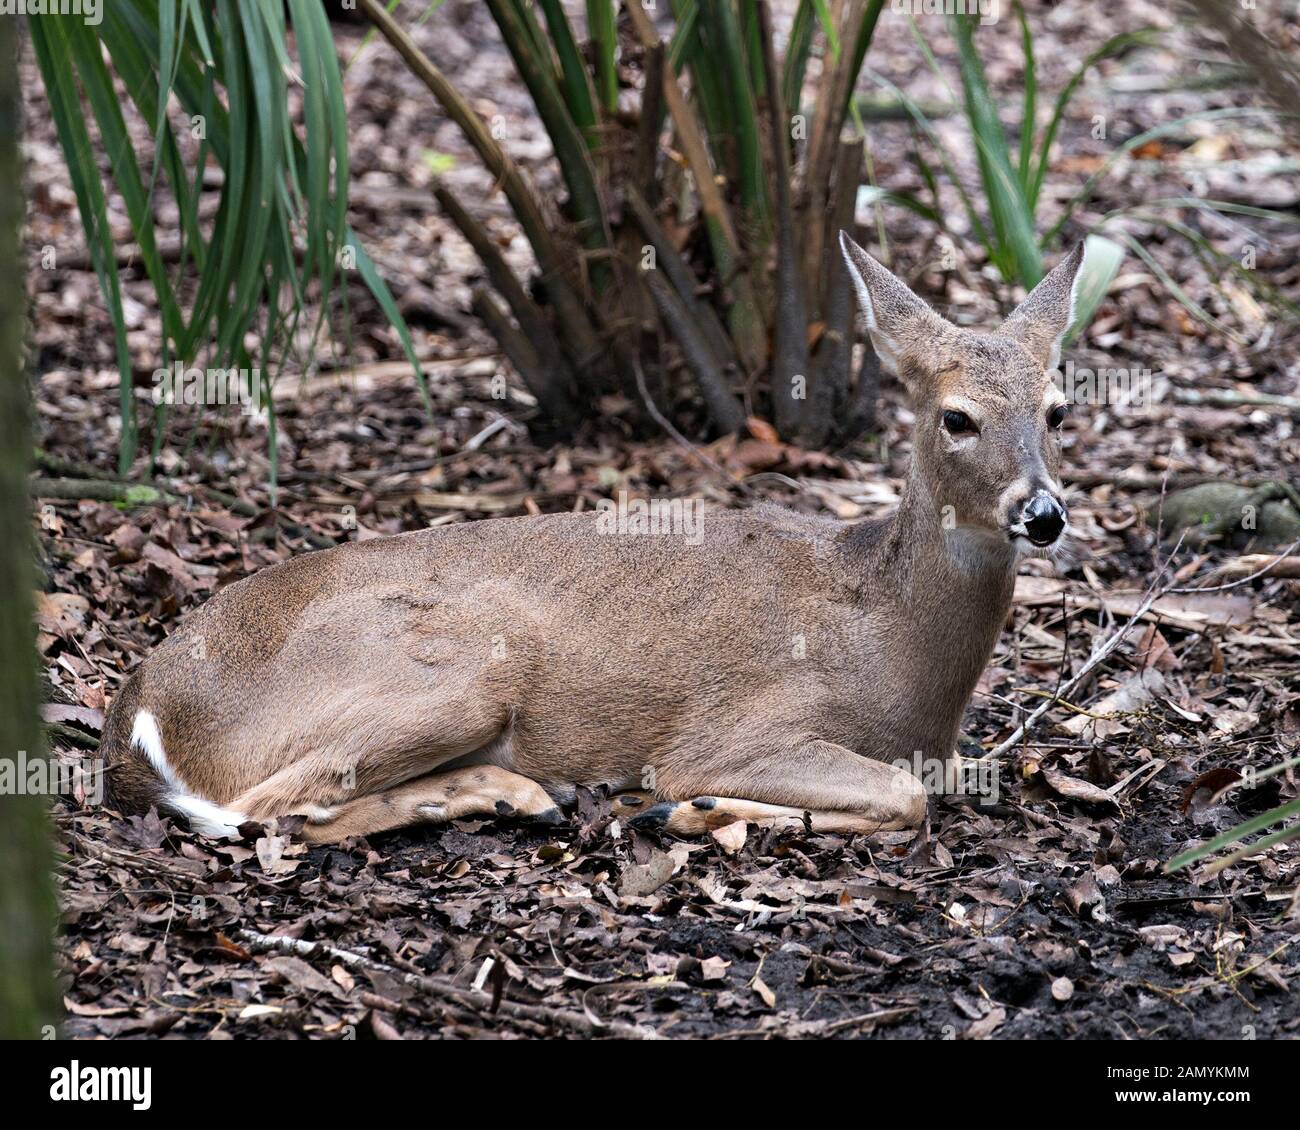 Deer animal resting close-up view displaying body, head, brown fur, ears, eyes, nose, legs in its environment and surrounding with a foliage backgroun Stock Photo